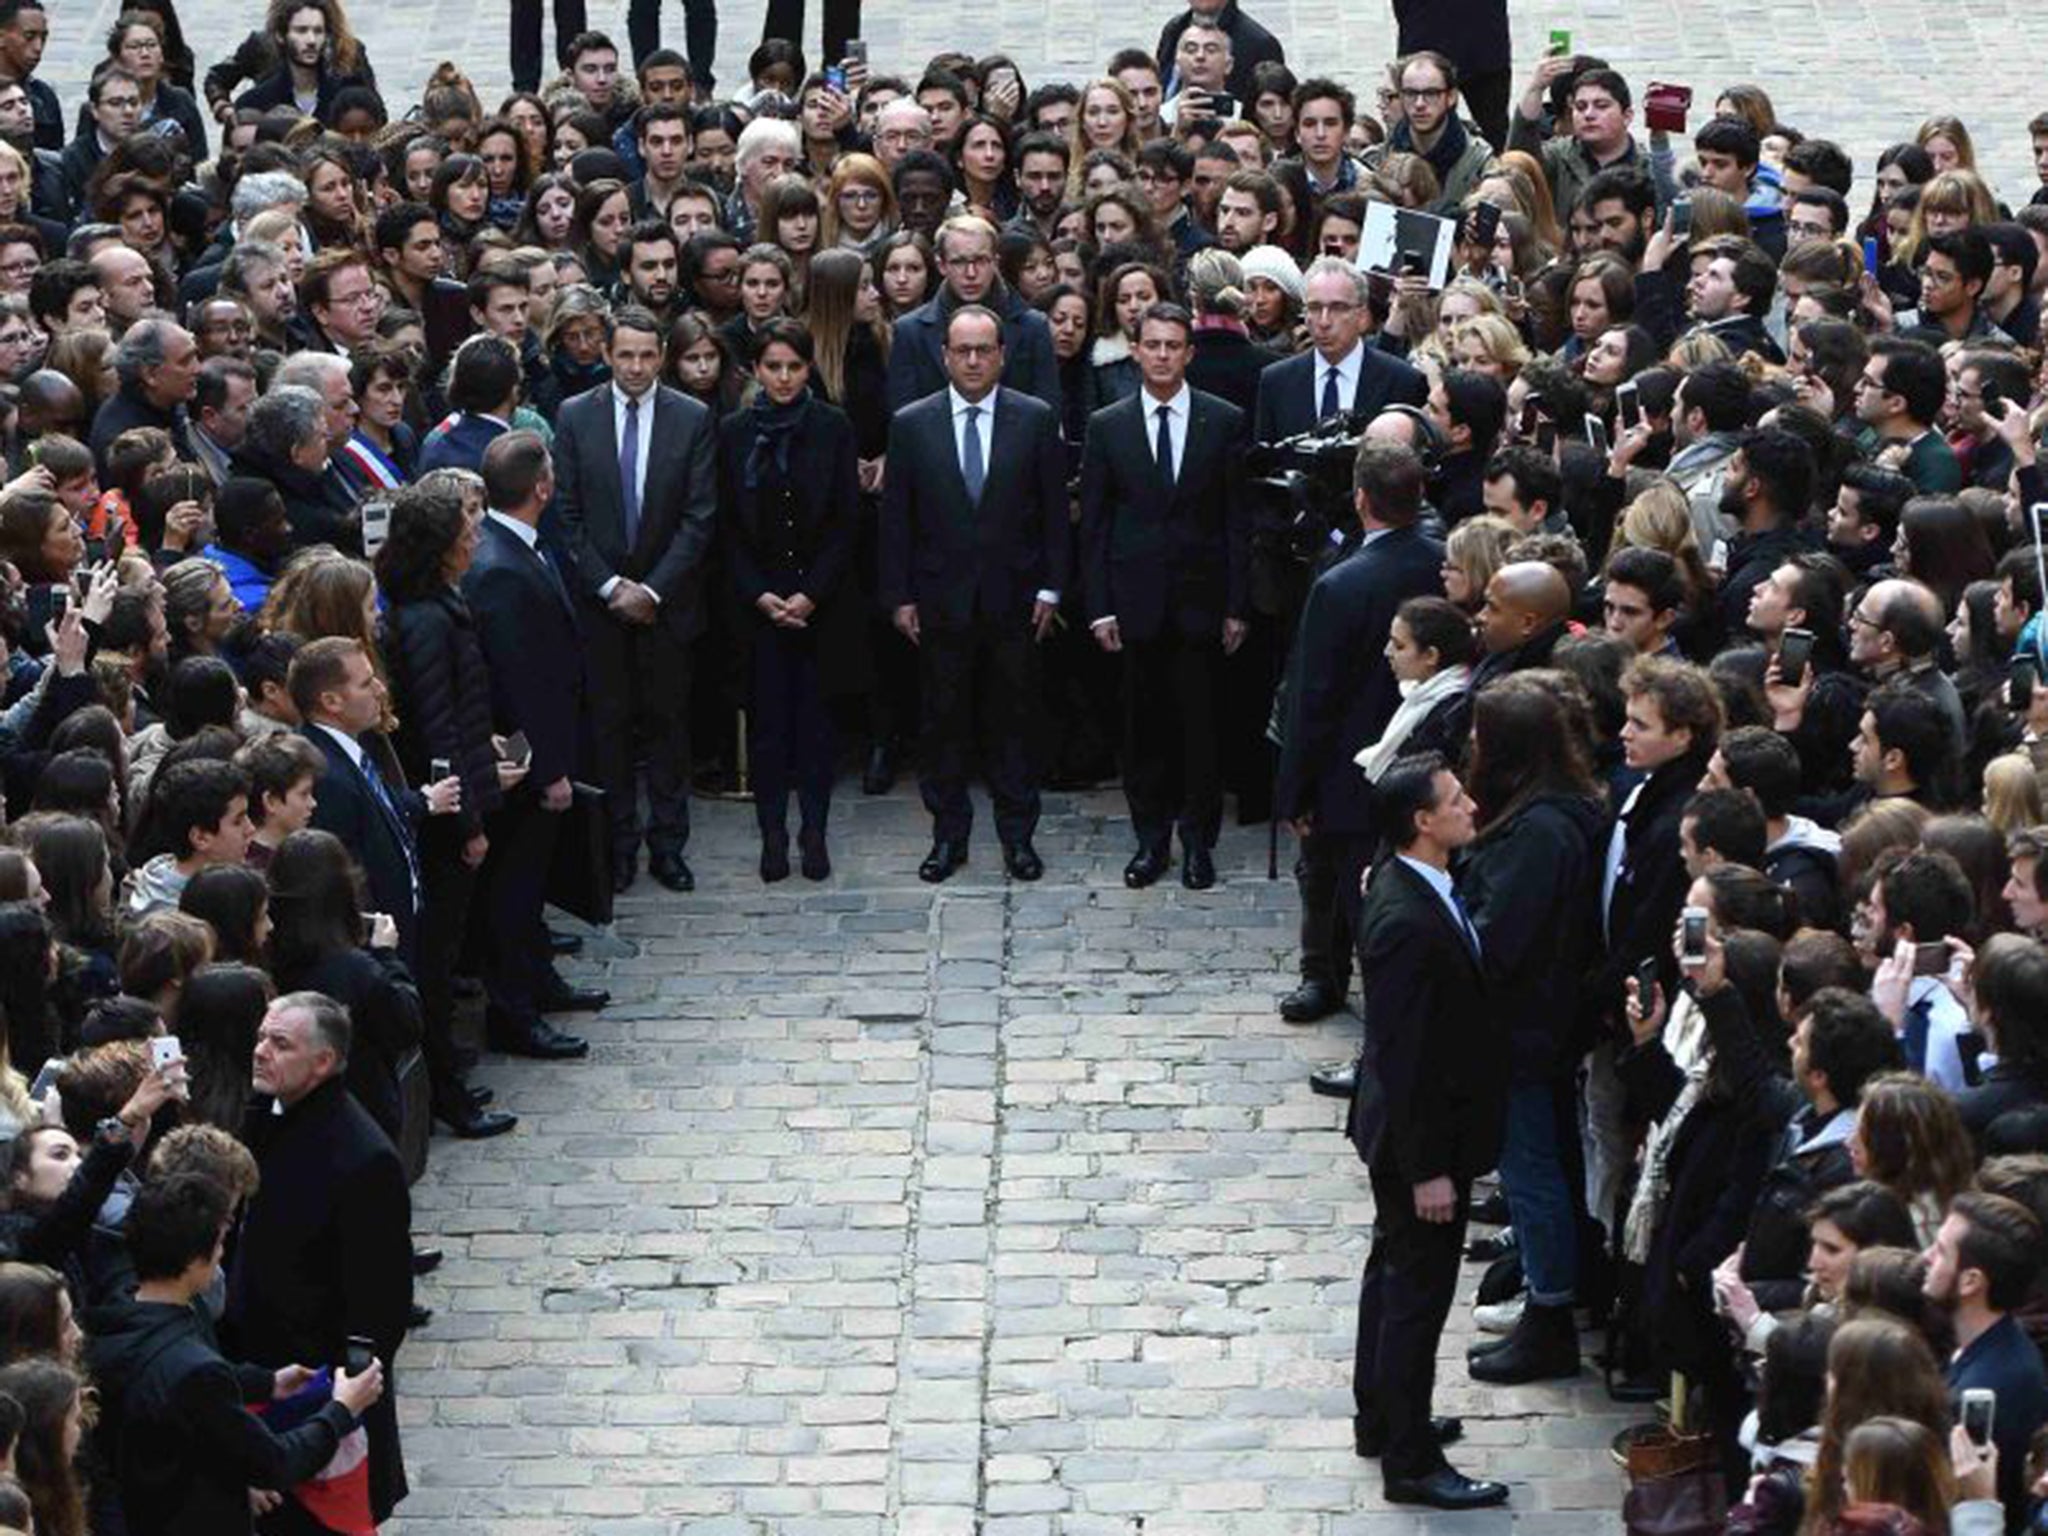 From left: French Minister for Higher Education and Research, Thierry Mandon; French Education Minister, Najat Vallaud-Belkacem; French President, Francois Hollande; and French Prime Minister, Manuel Valls stand among students as they observe a minute of silence at the Sorbonne University in Paris